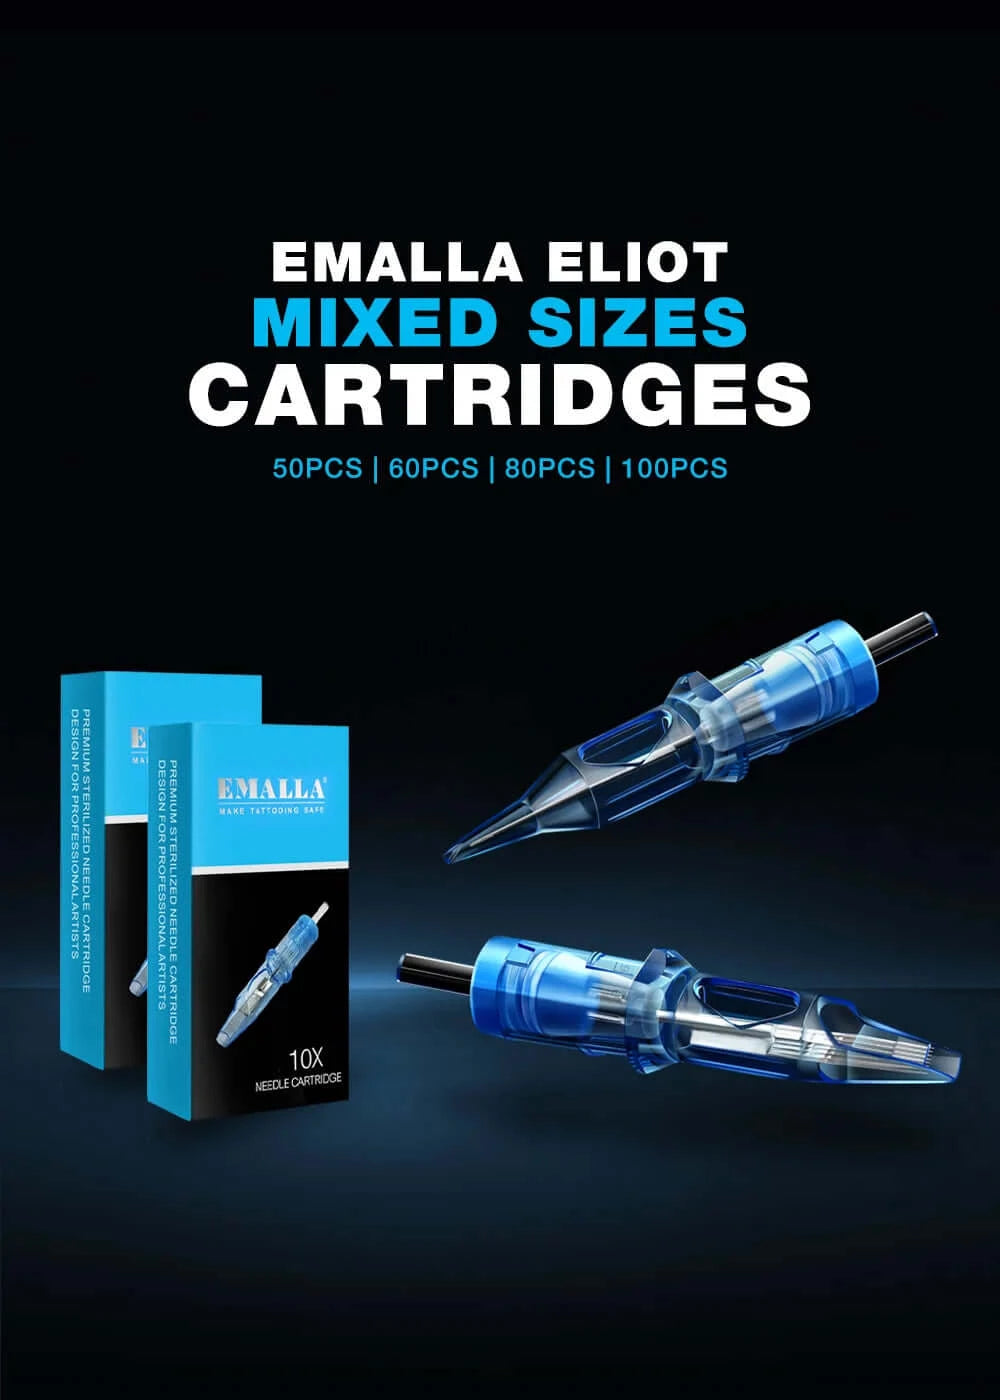 Emalla Eliot Mixed Sizes Cartridge Needles on sale on Emalla Official Website now